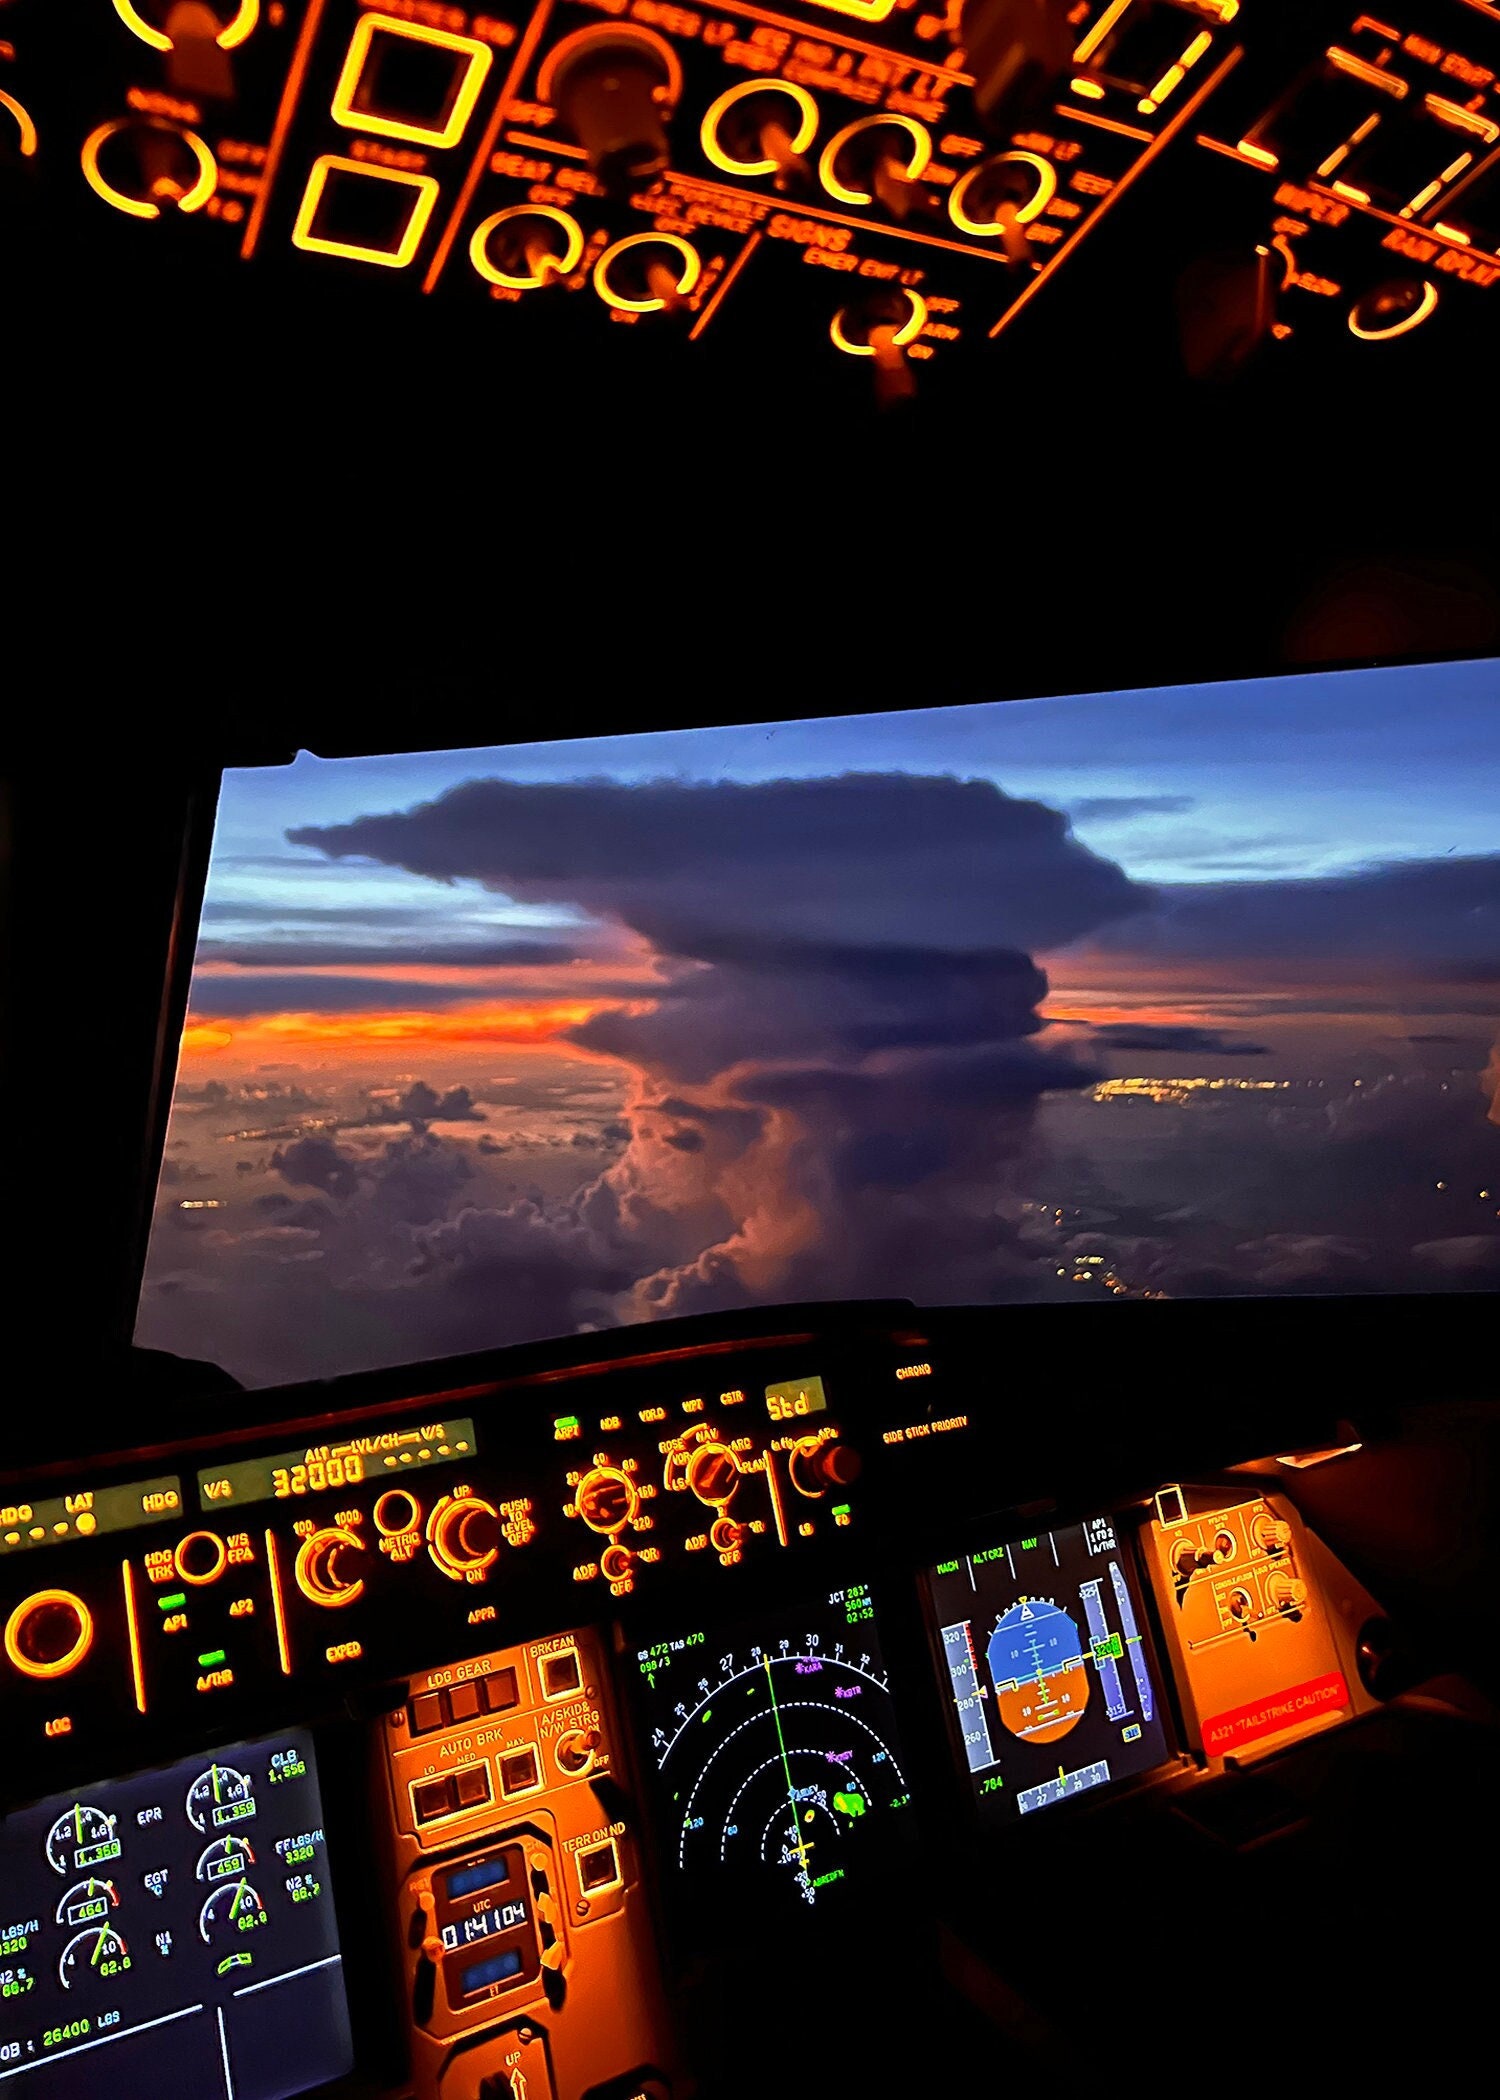 Evening Florida Thuderstorm From Airbus A321 Cockpit - Etsy